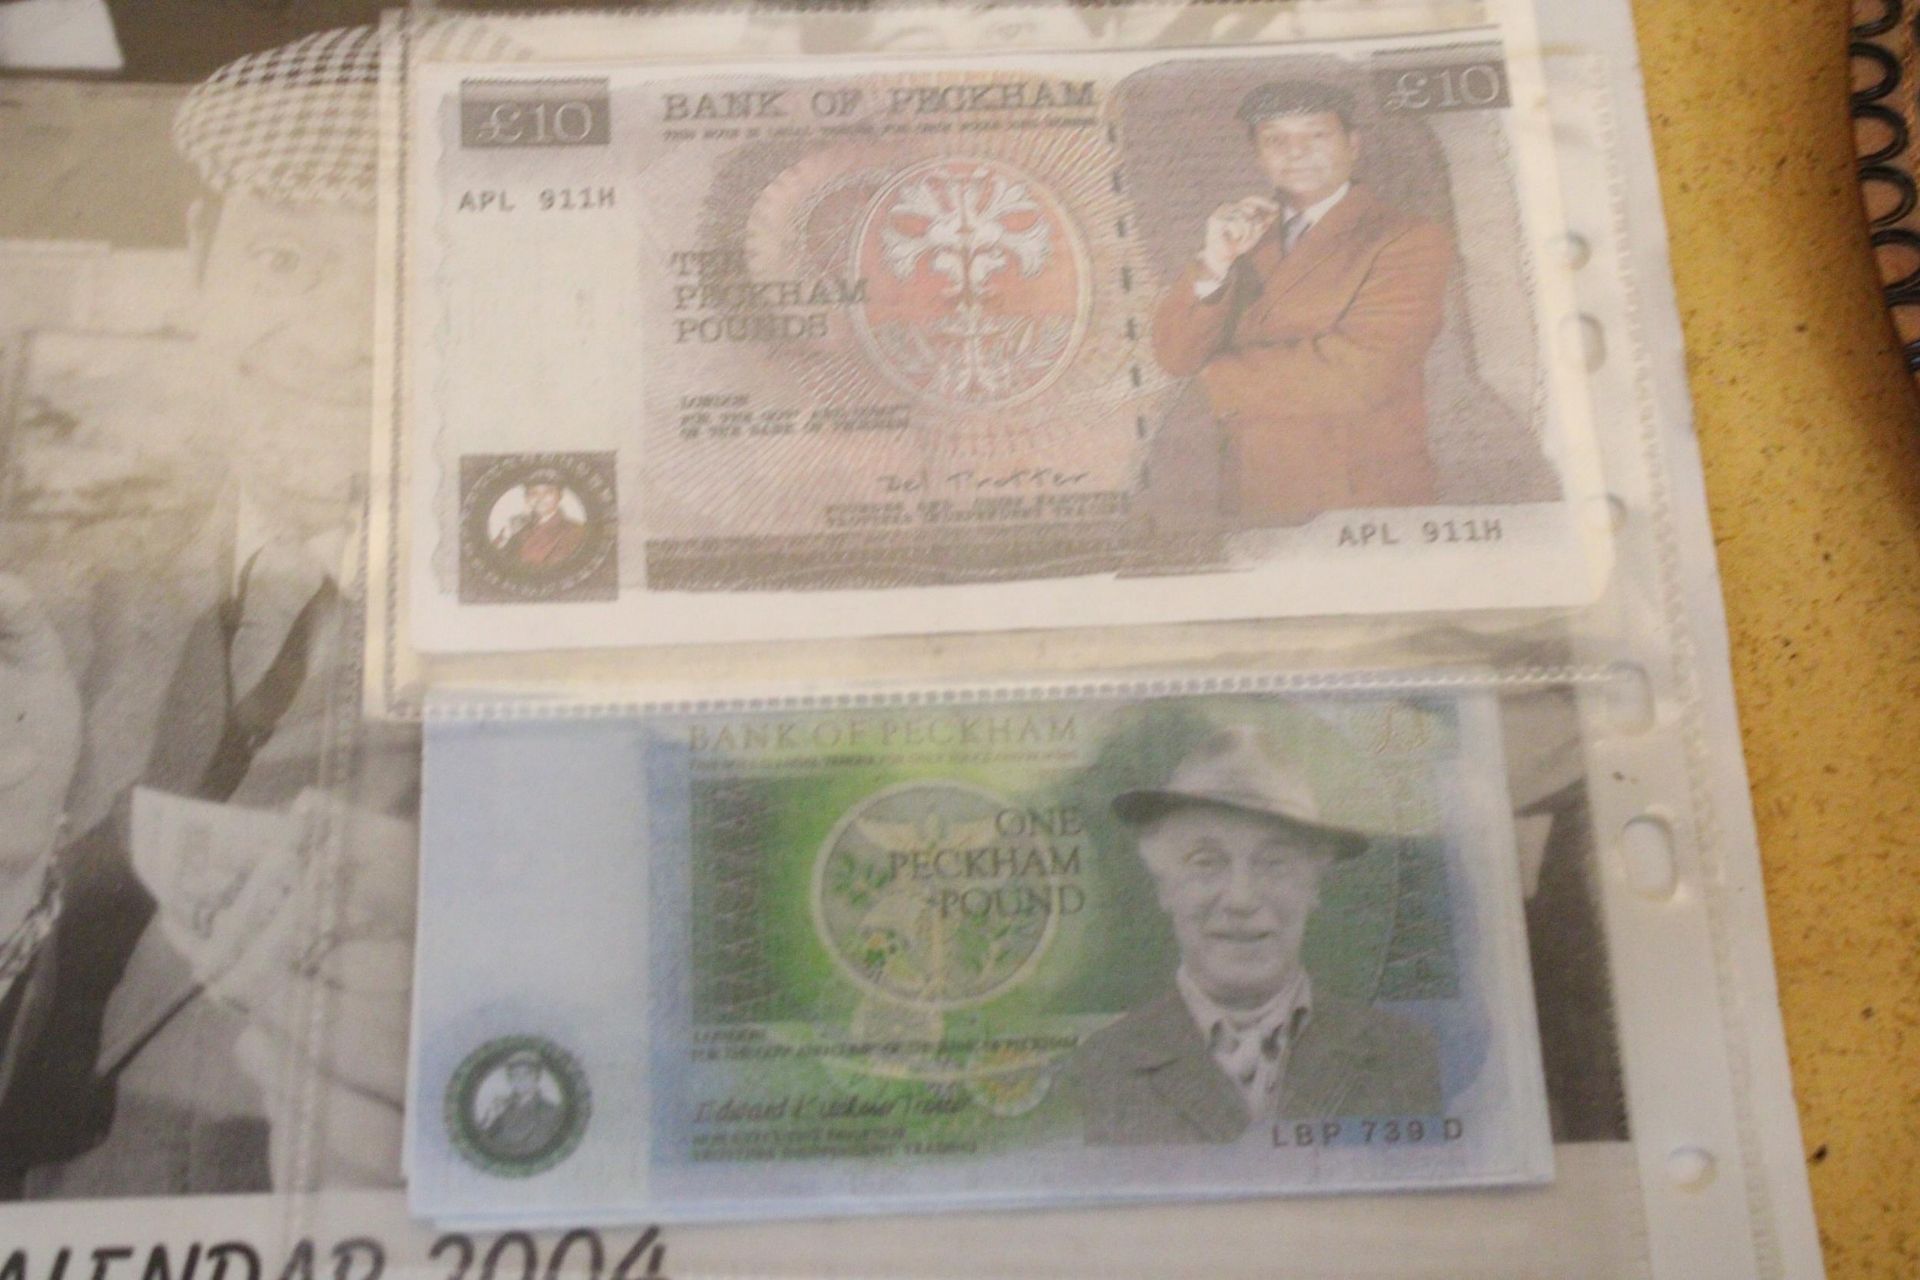 TEN £1 NOTES, ONE £5 NOTE, ONE £10 NOTE AND ONE £20 NOTE FOR THE BANK OF PECKHAM (ONLY FOOLS AND - Image 3 of 4